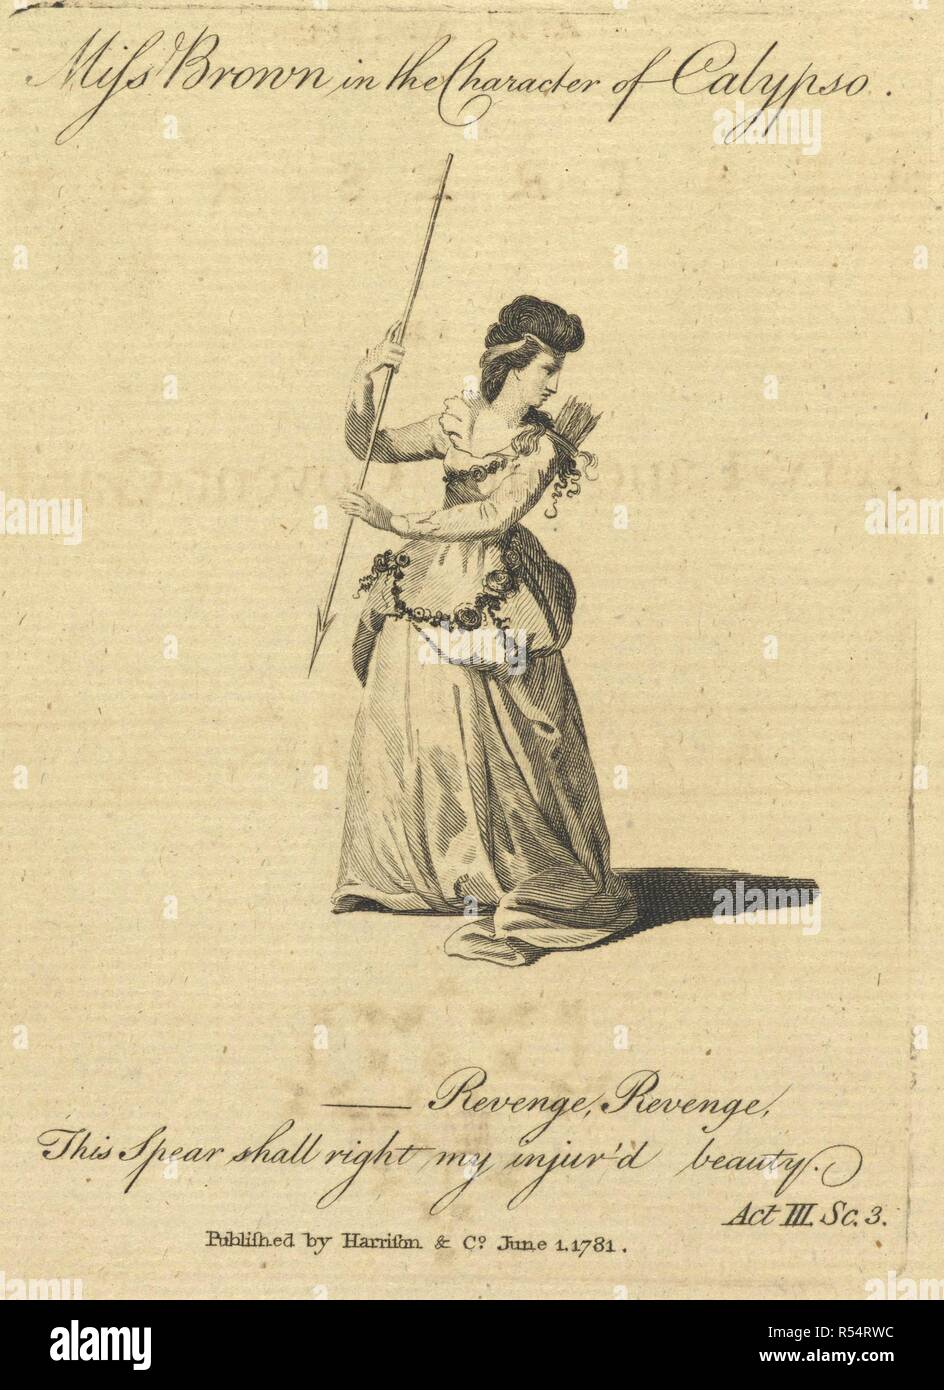 Miss Brown in the character of Calypso.  'Revenge, revenge ! This spear shall right my injur'd beauty.' Act III. Scene 3. Calypso and Telemachus. An opera, etc. London : Harrison & Co.; J. Wenman, 1781. Source: 11770.g.5.(26,27). Author: HUGHES, JOHN. Stock Photo